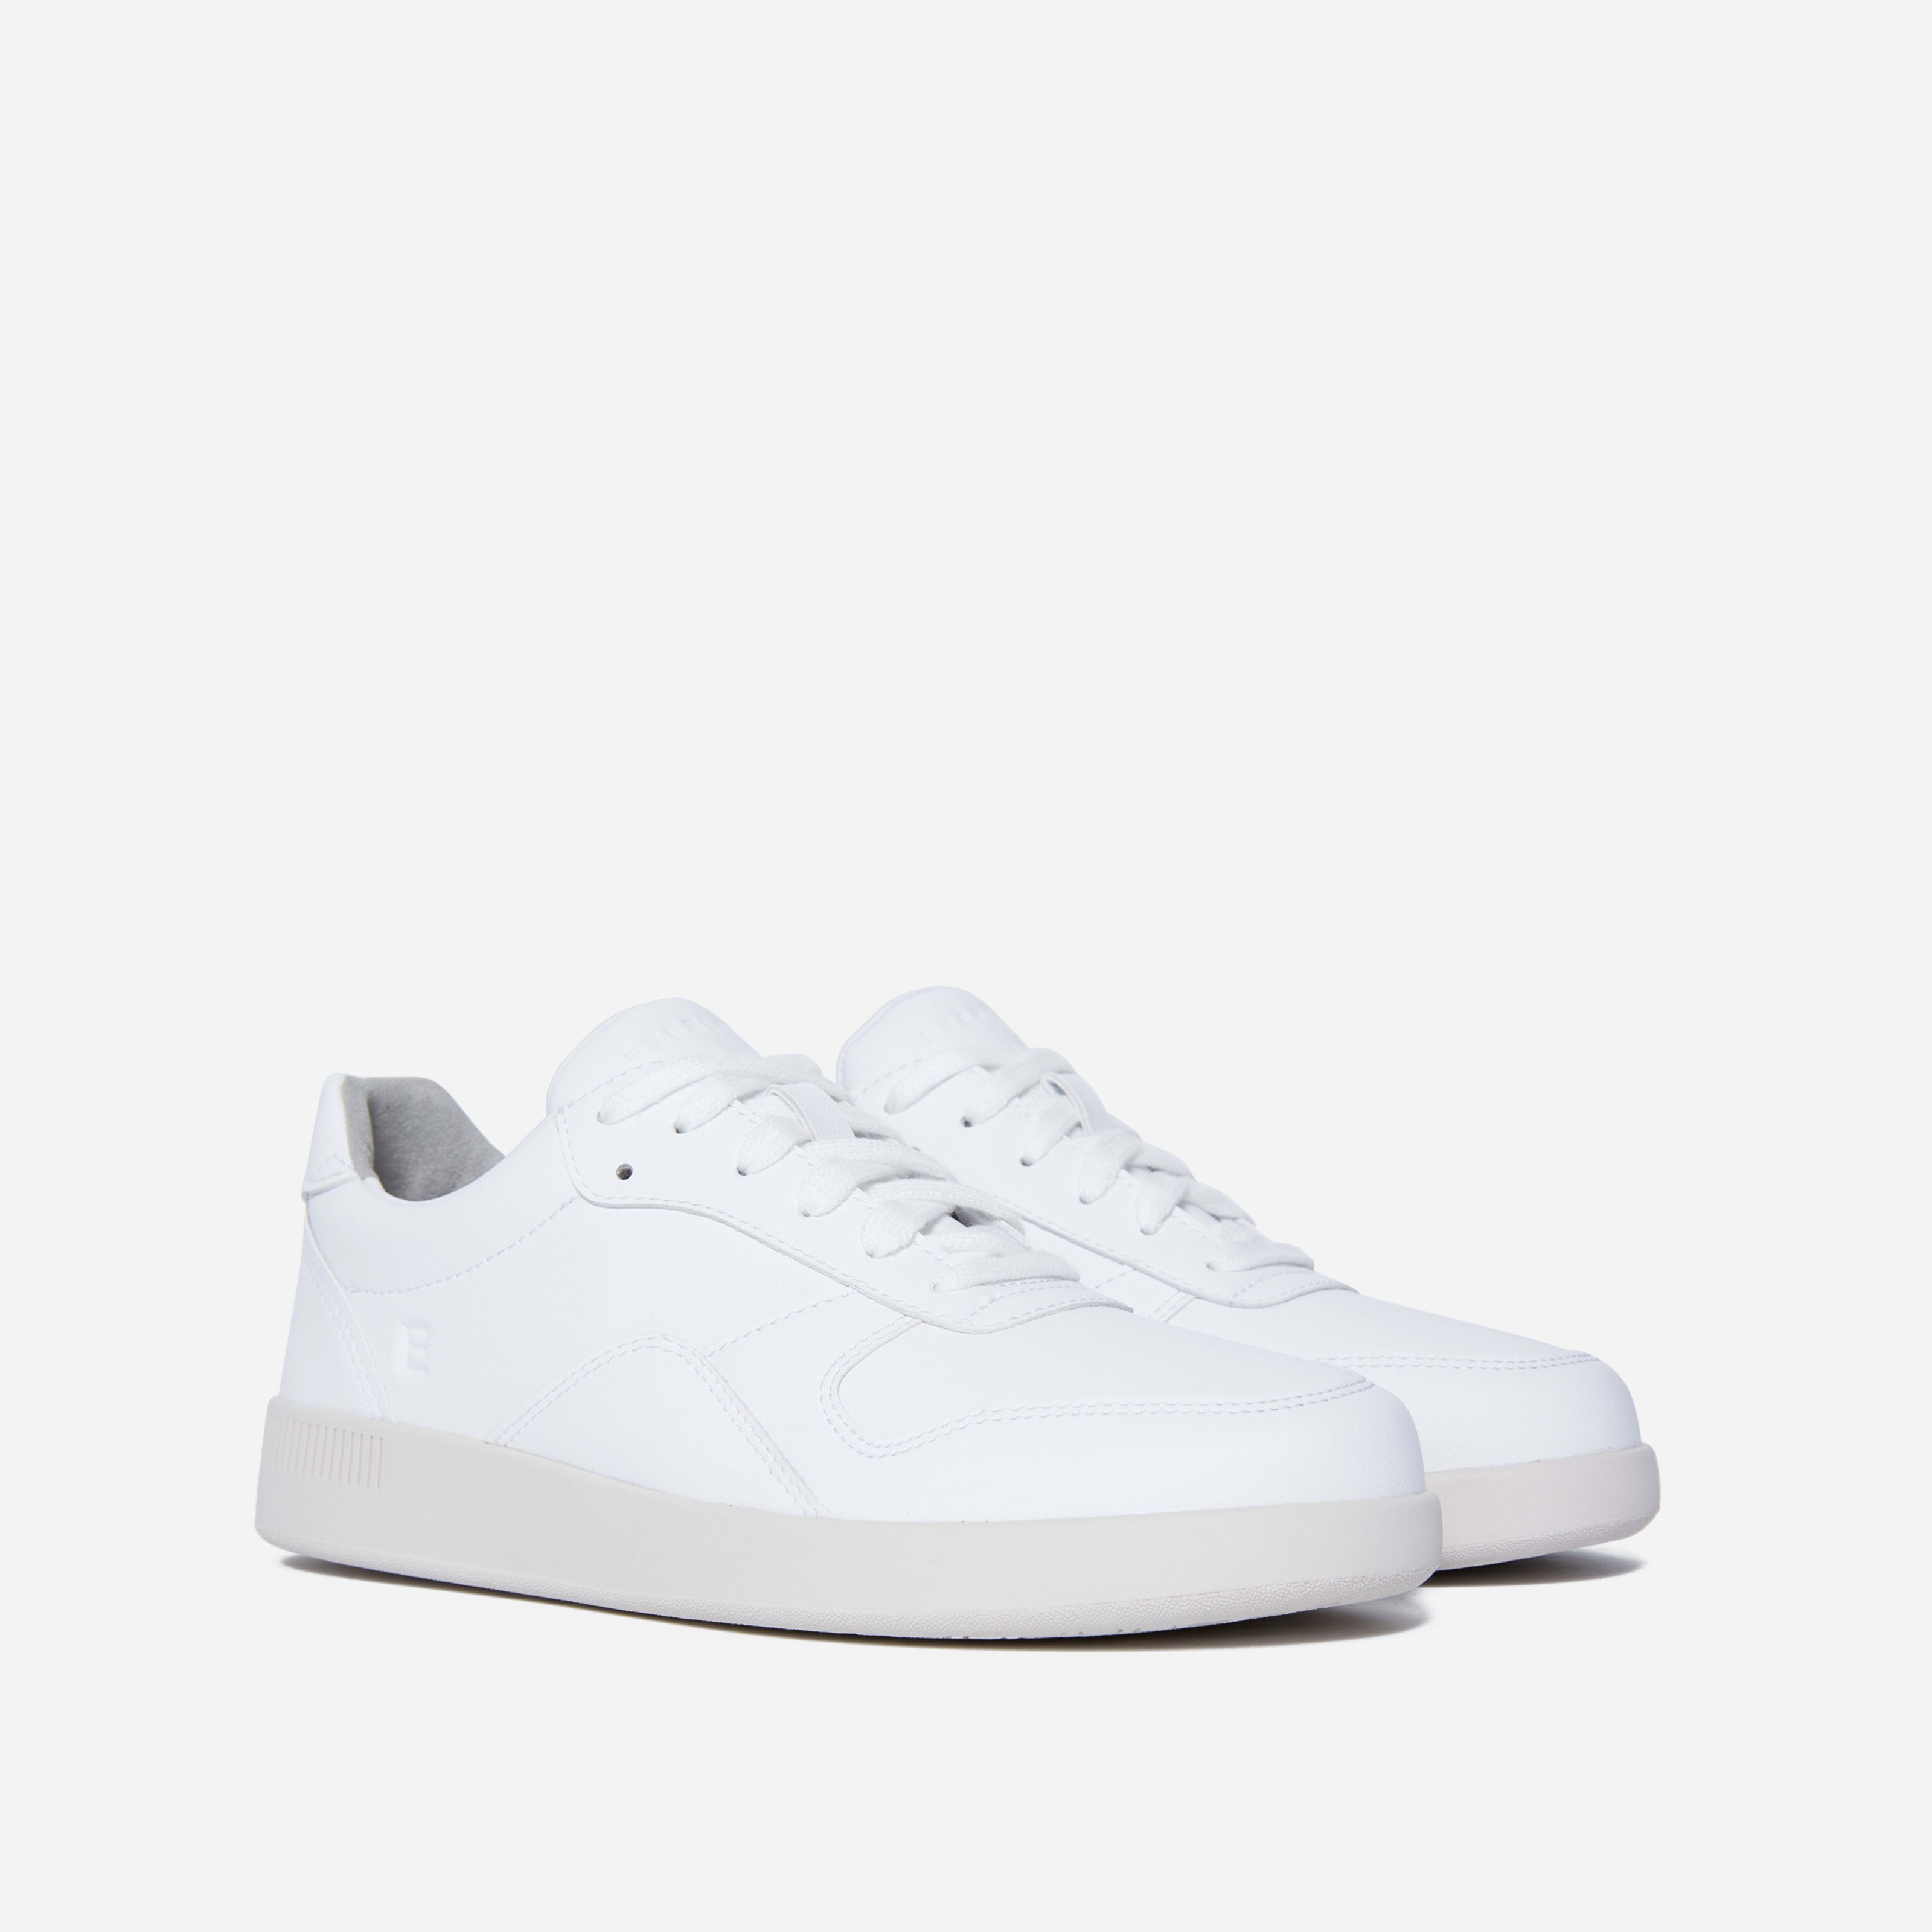 Women's ReLeather Court Sneaker by Everlane in White, Size W9M7 | Everlane